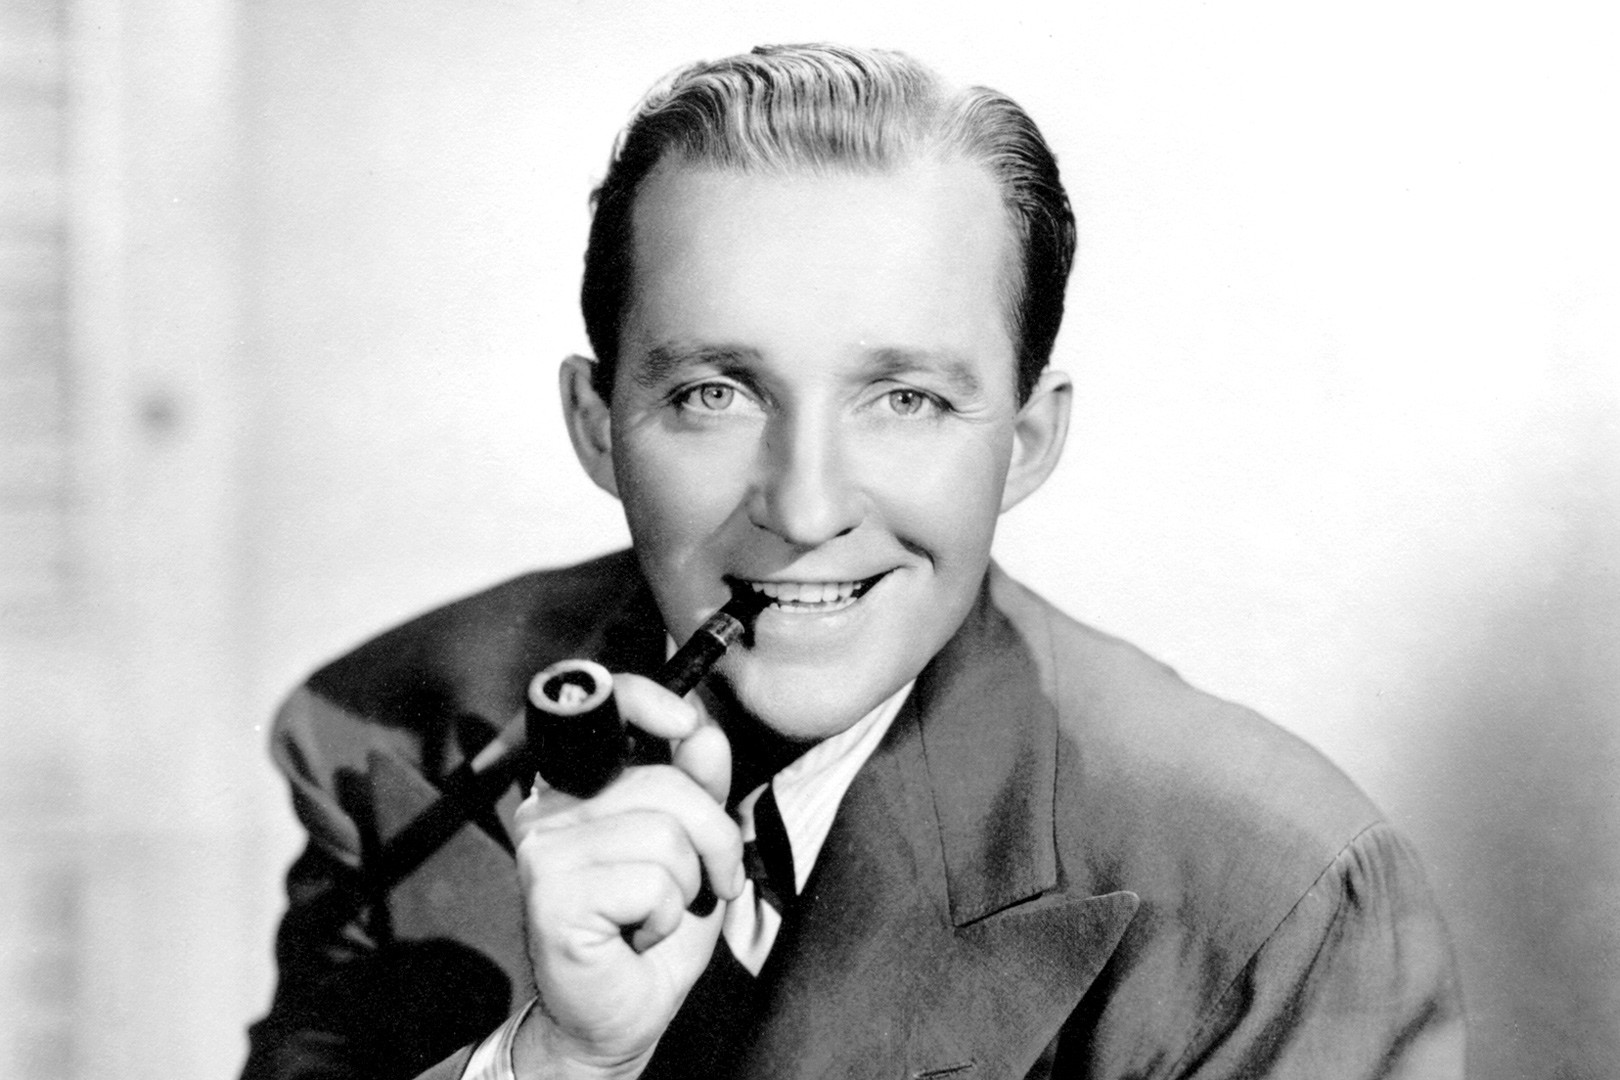 what bing crosby recording has estimated sales in excess of 100 million copies worldwide